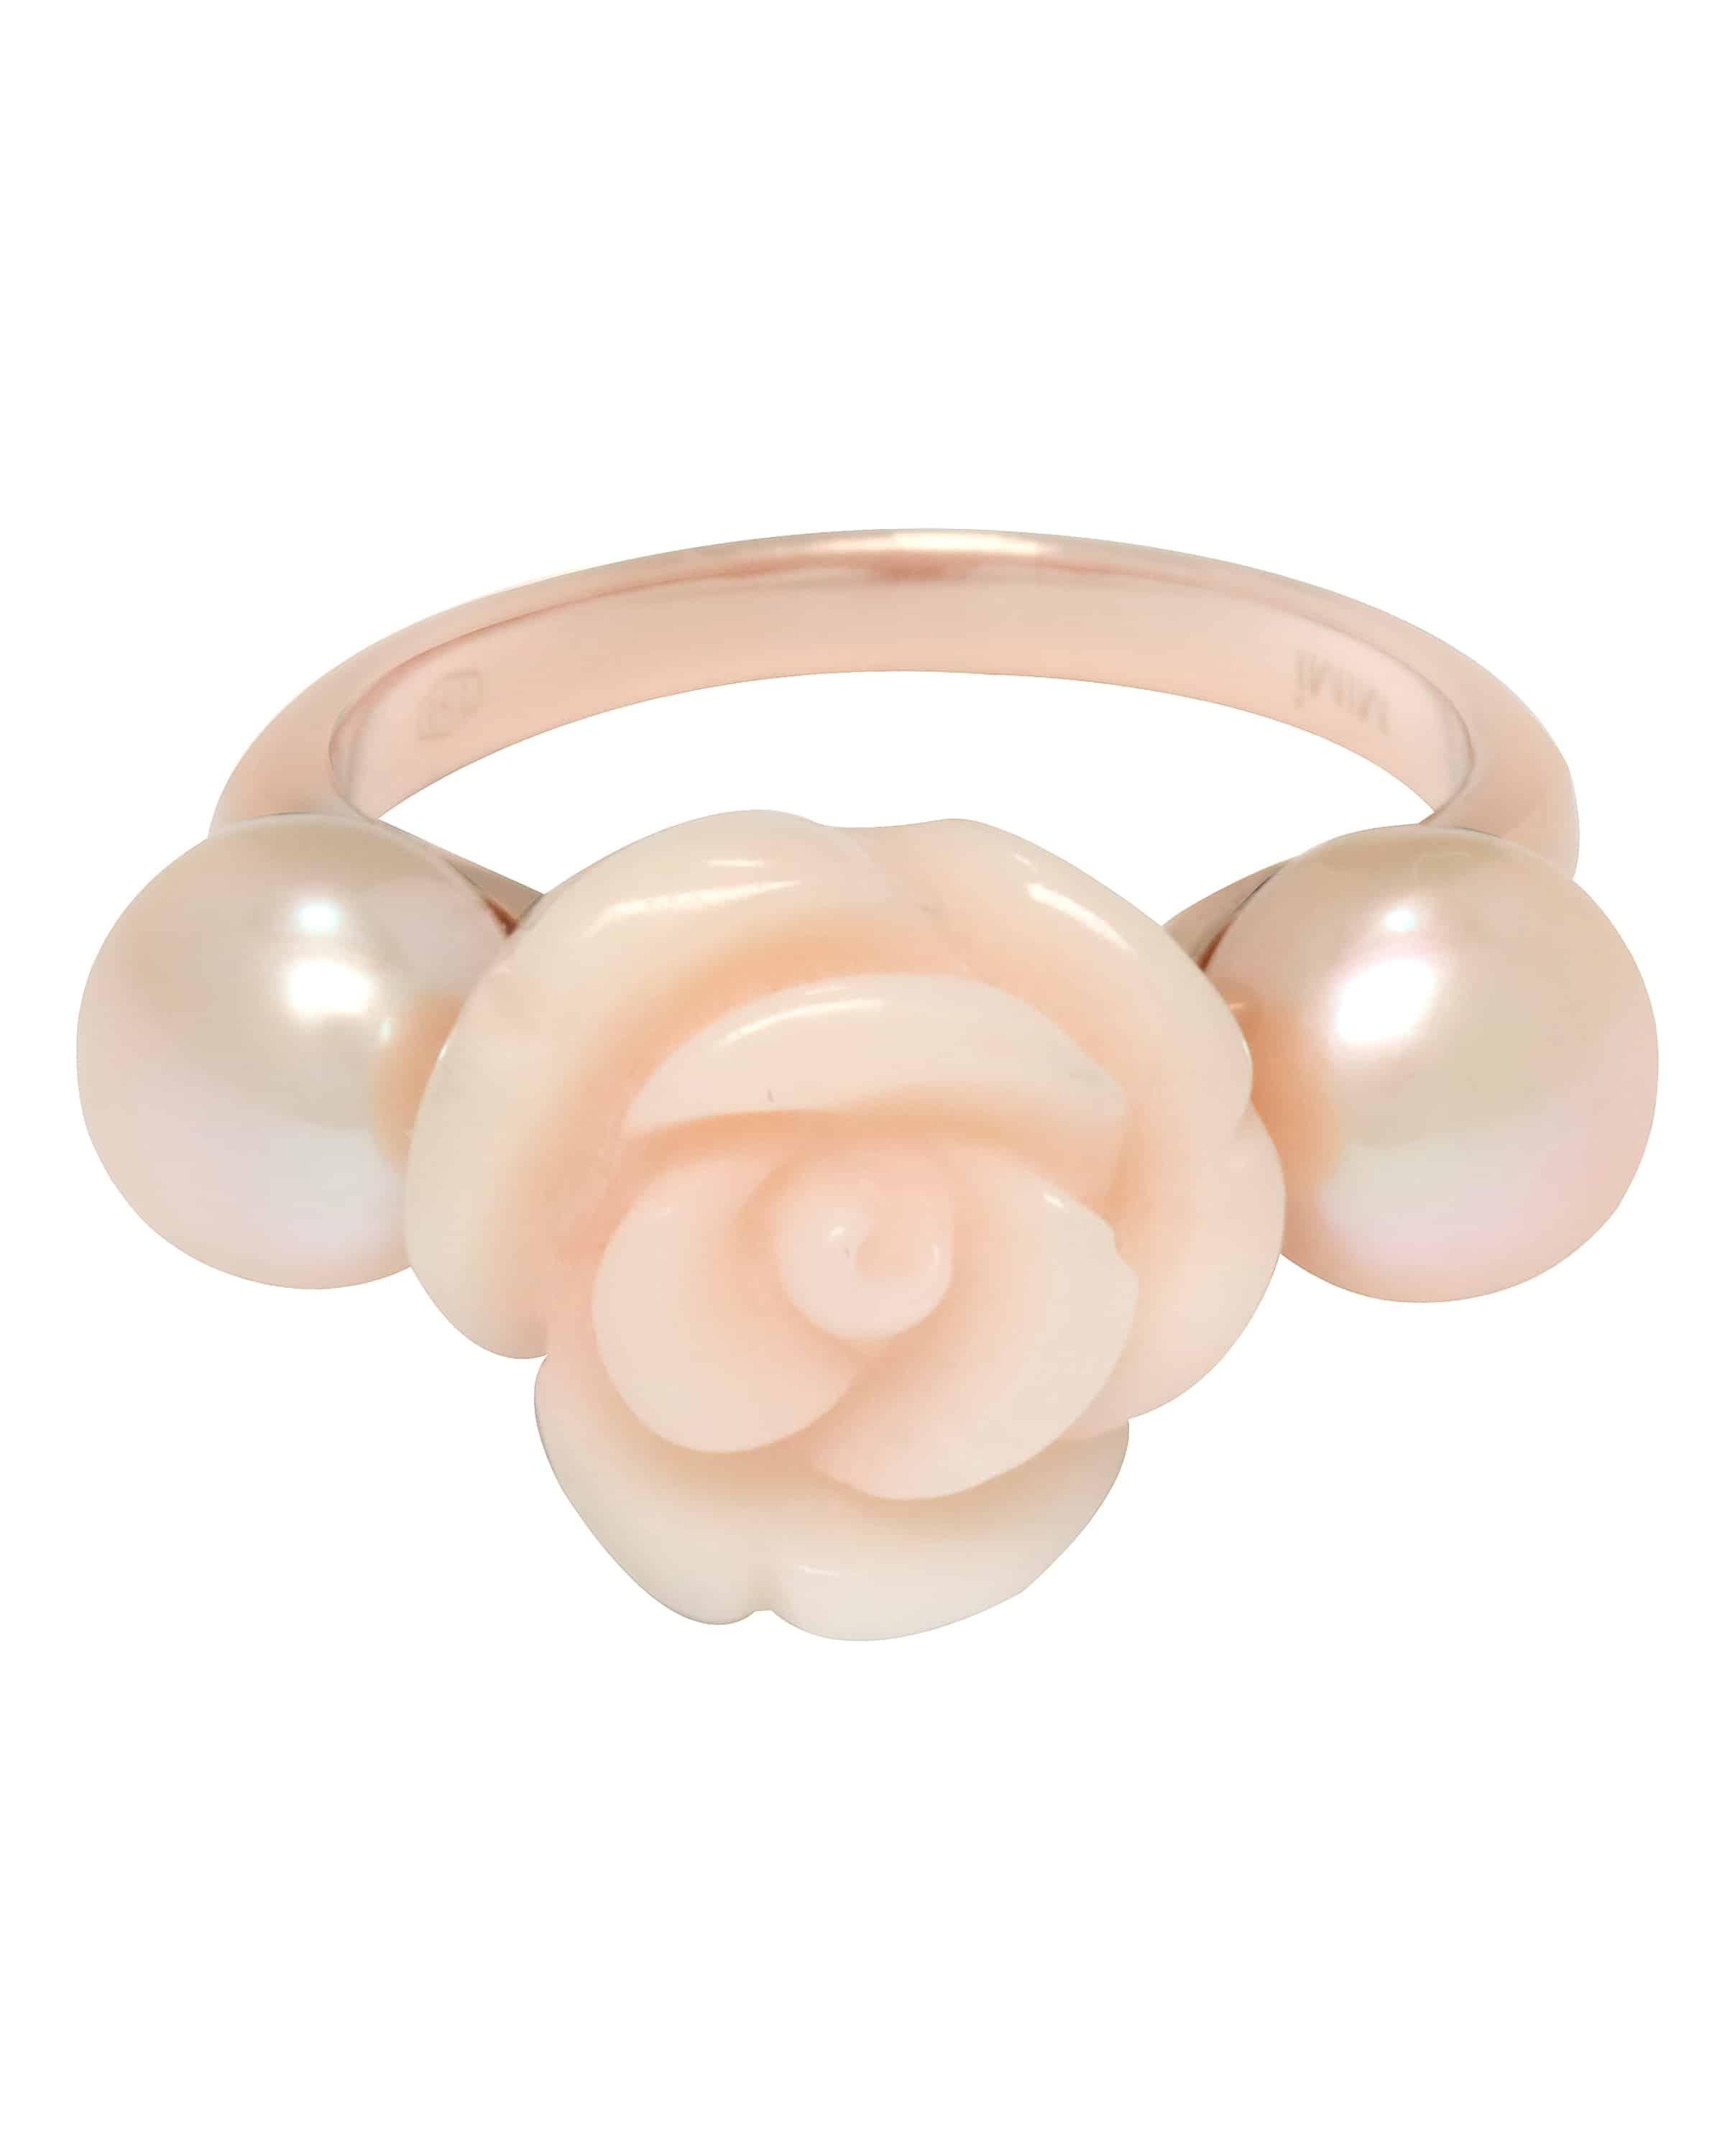 Mimi 18k Rose Gold Ring. Ring Size 7.5. With Agate and Pearl. Pink Agate Rose Flanked by two Pearls. Total Weight:7.7g. Shipped in Mimi Box. Manufacturers Suggested Retail Price $1,670